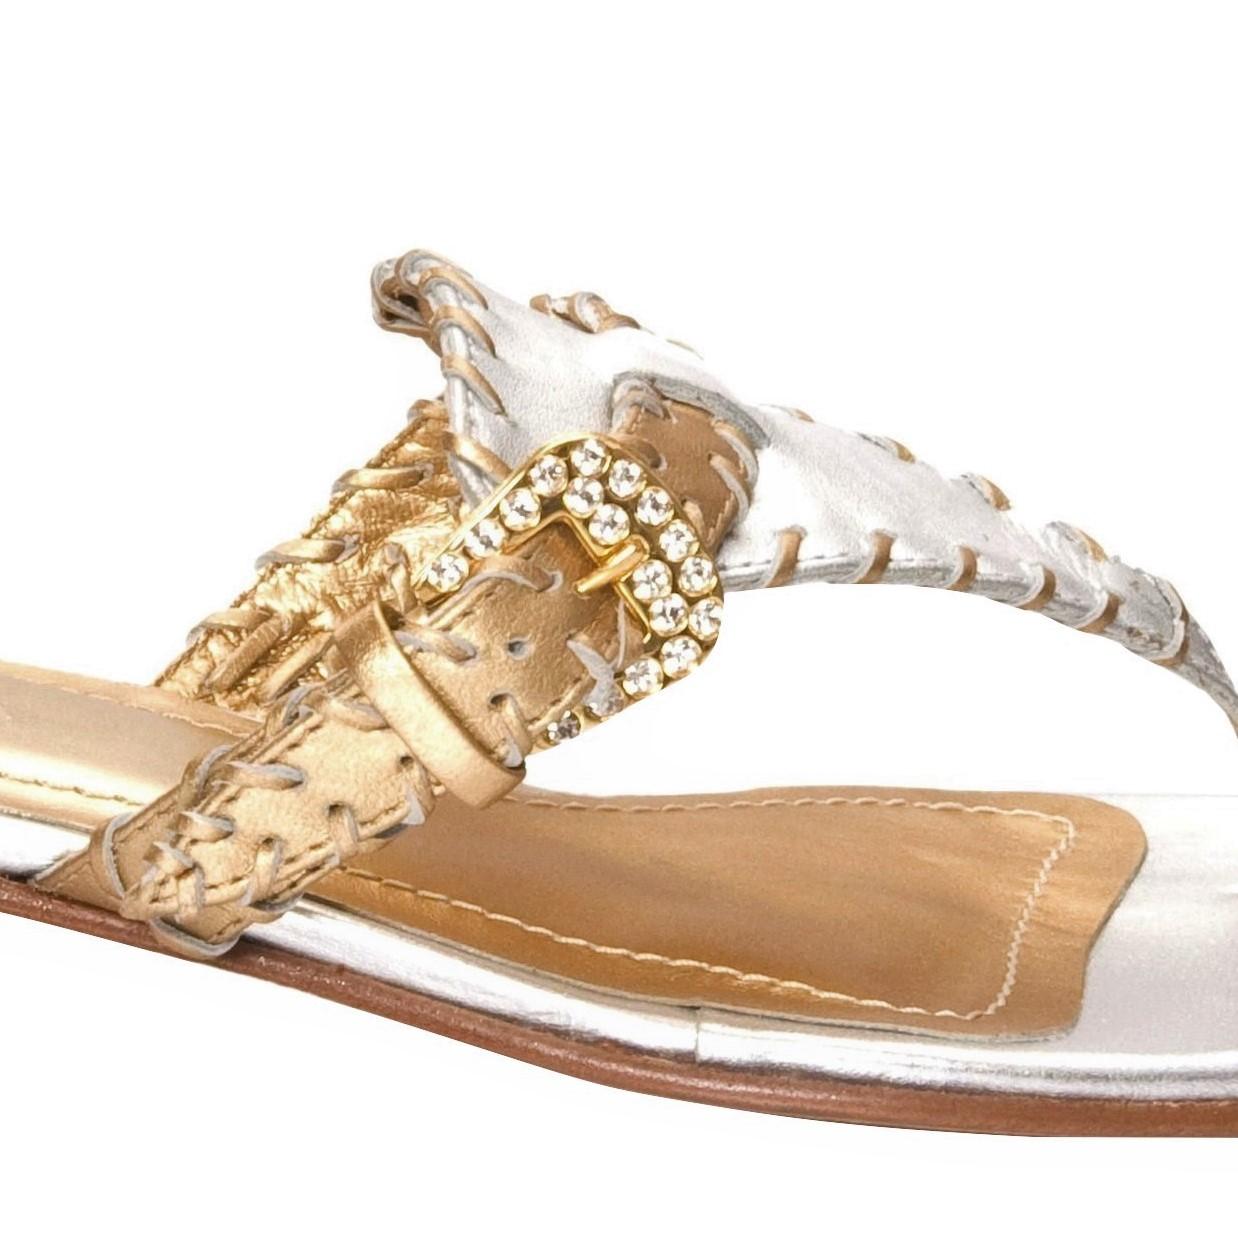 Ramon Tenza Spain
Brand New
Gold & Silver Thong Sandals
* Padded Leather Footbed
* Gold & Silver Leather 
* Crystal Adjustable Buckle Strap
* Size: 7.5
* 1.25